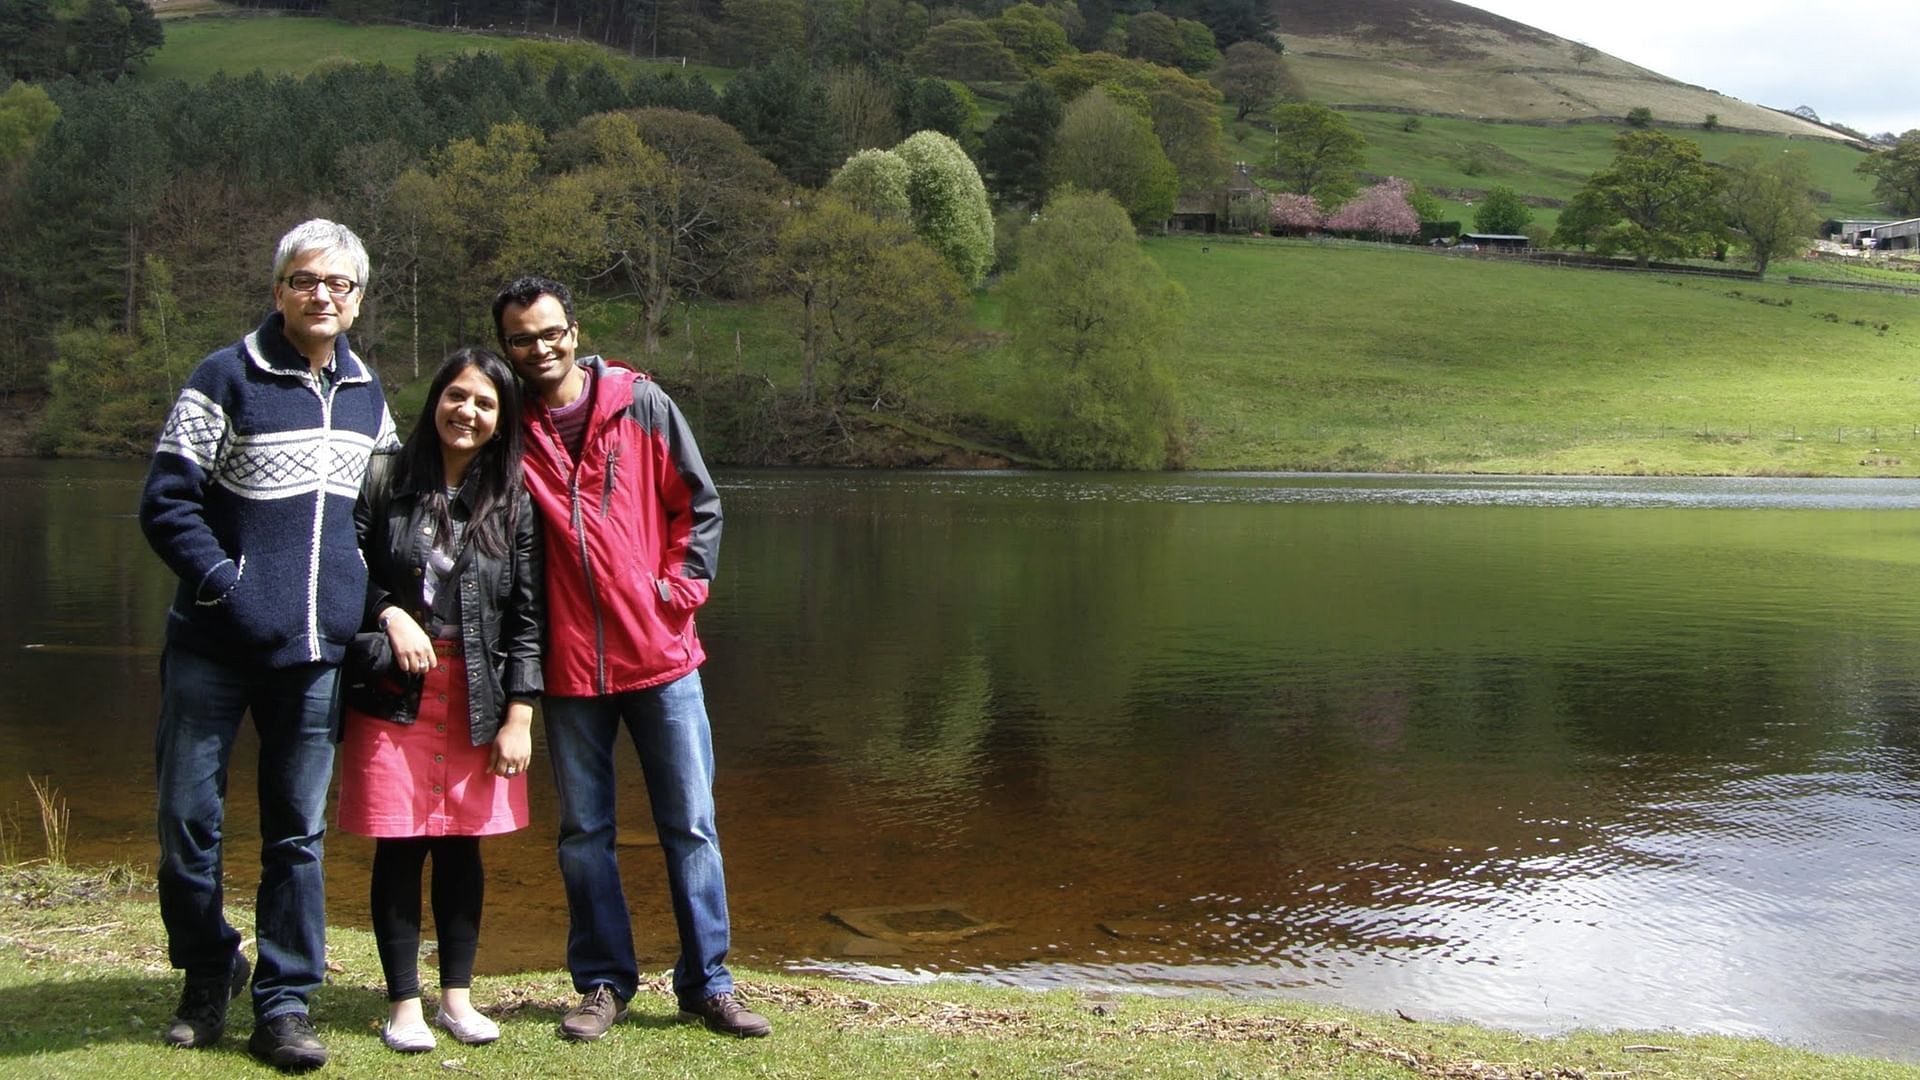 Bobby Tiwana and Abhijit Shetty share their lives and stories with me at a lakeside in Sheffield. (Photo: Megha Mathur)